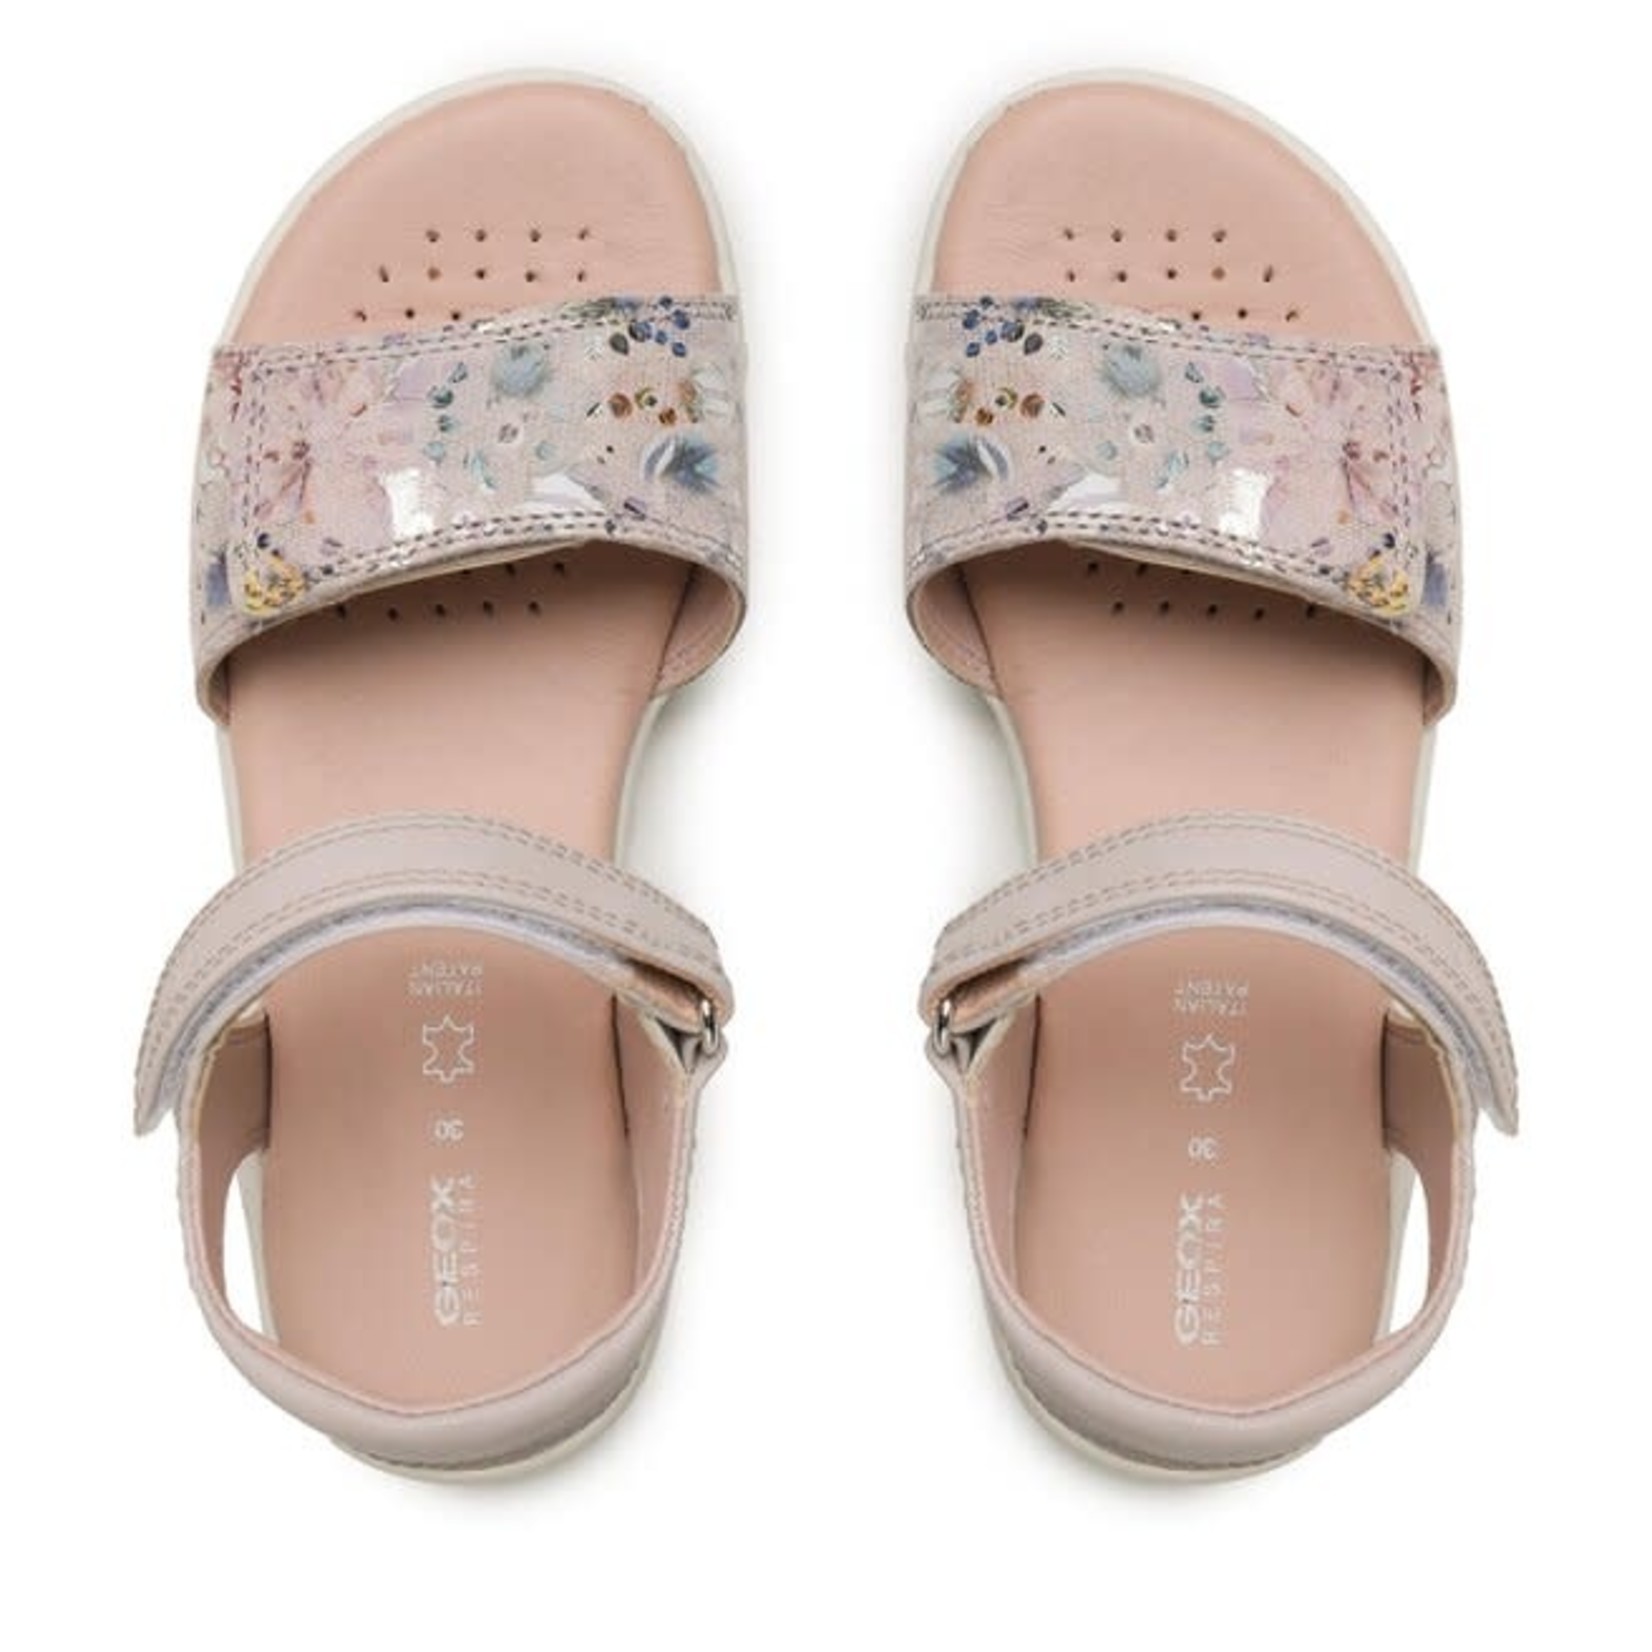 Geox GEOX - Open toe sandals 'J S. Haiti - Light pink with floral print'